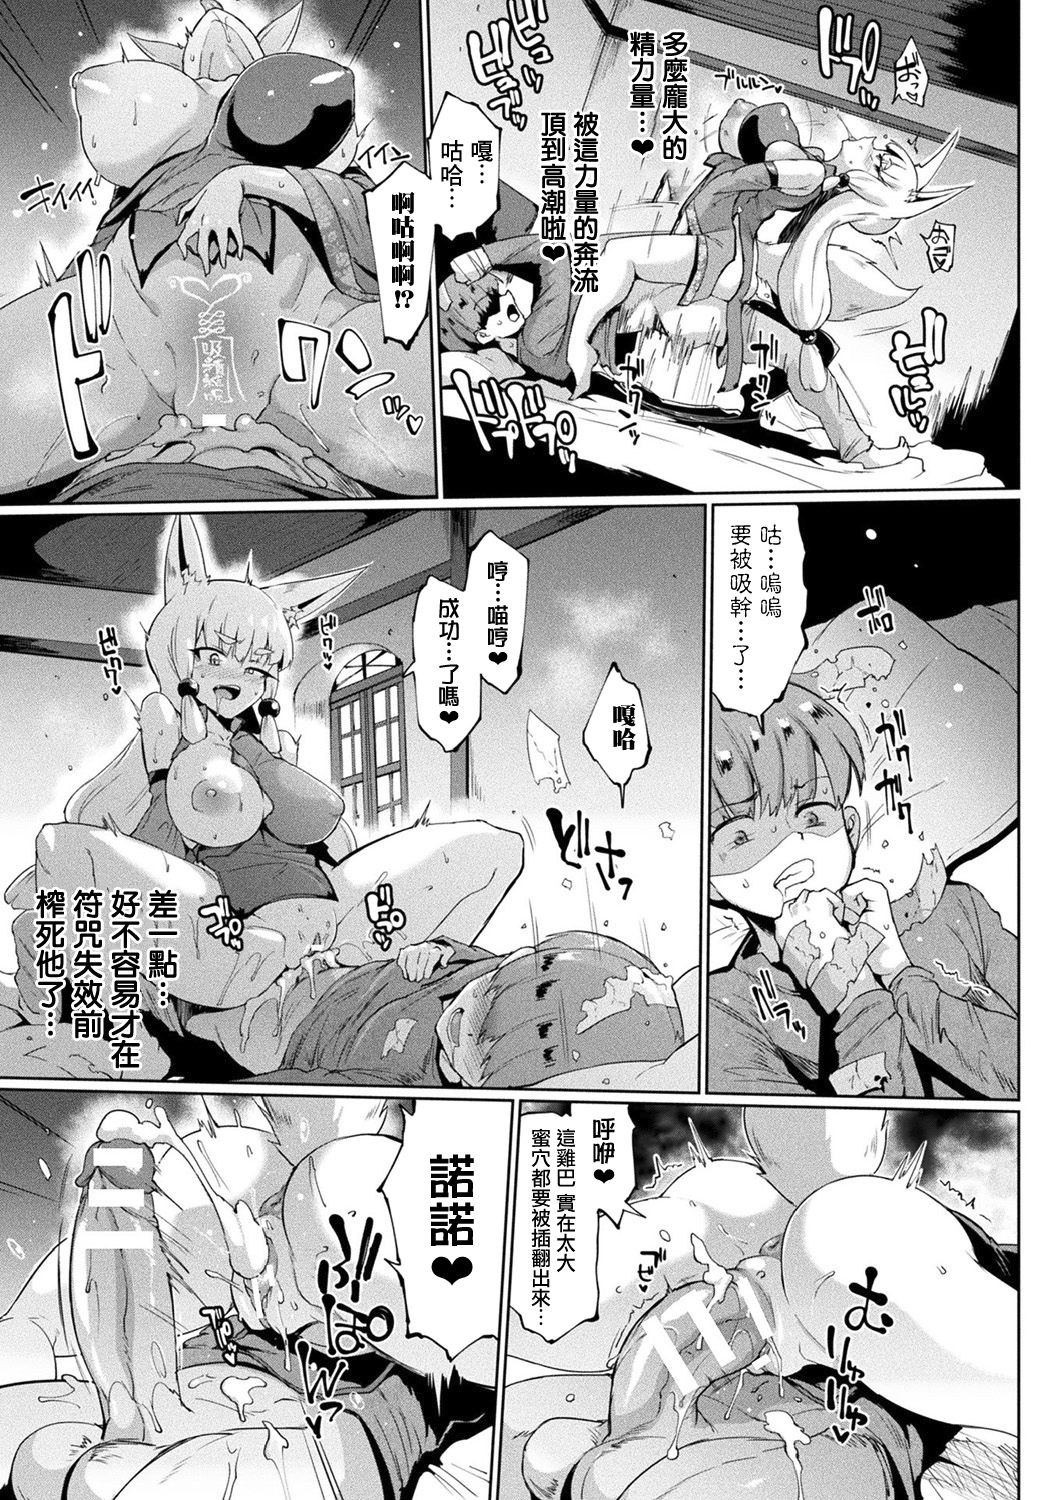 [Fan no hitori] YOUR GRACE, MY MASTER (COMIC Unreal 2019-10 Vol. 81) [Chinese] [鬼畜王汉化组] [Digital] page 16 full